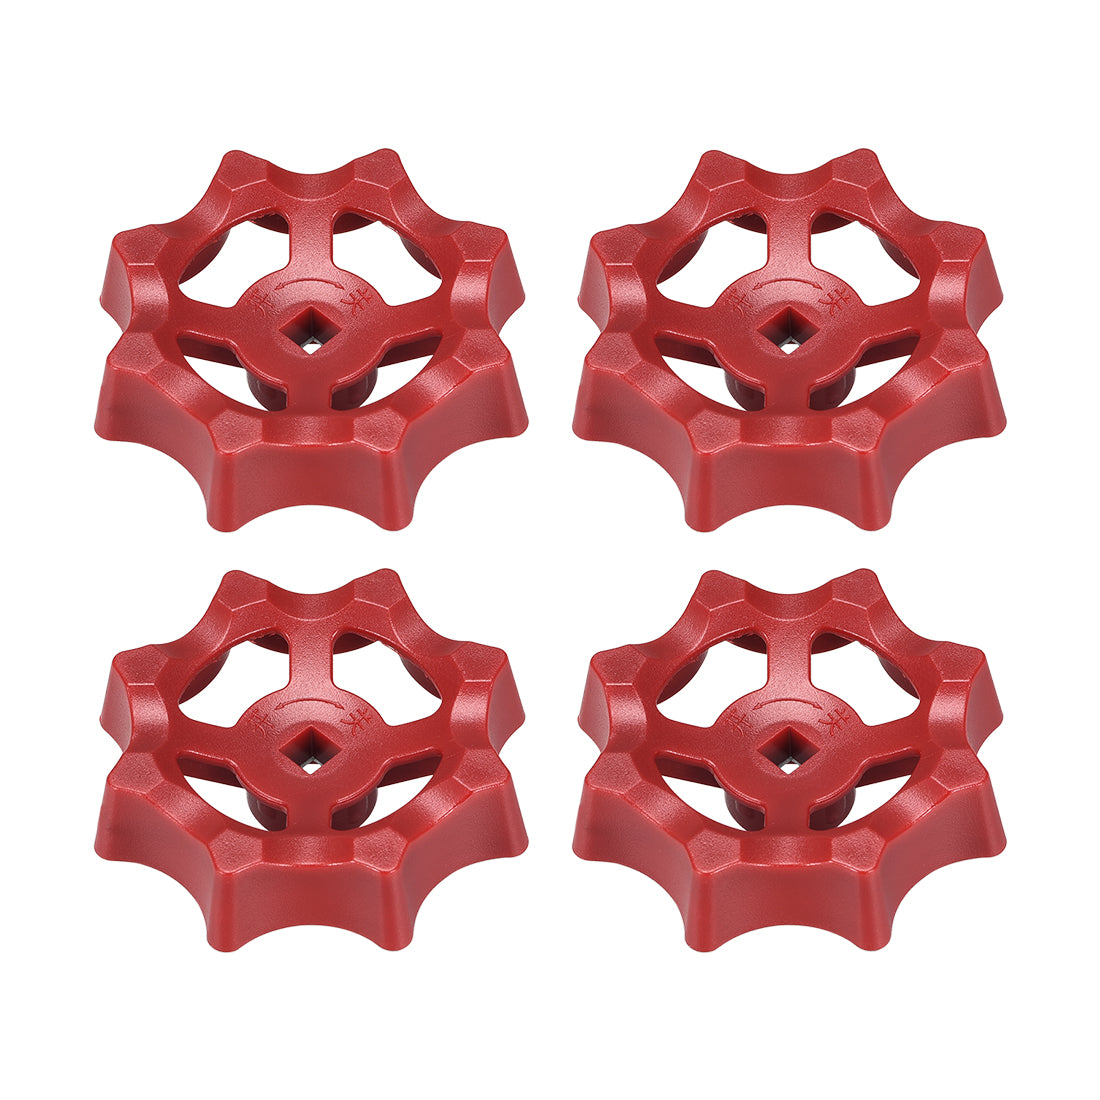 Uxcell Uxcell Round Wheel Handle, Square Broach 7x7mm, Wheel OD 70mm ABS Red 4Pcs